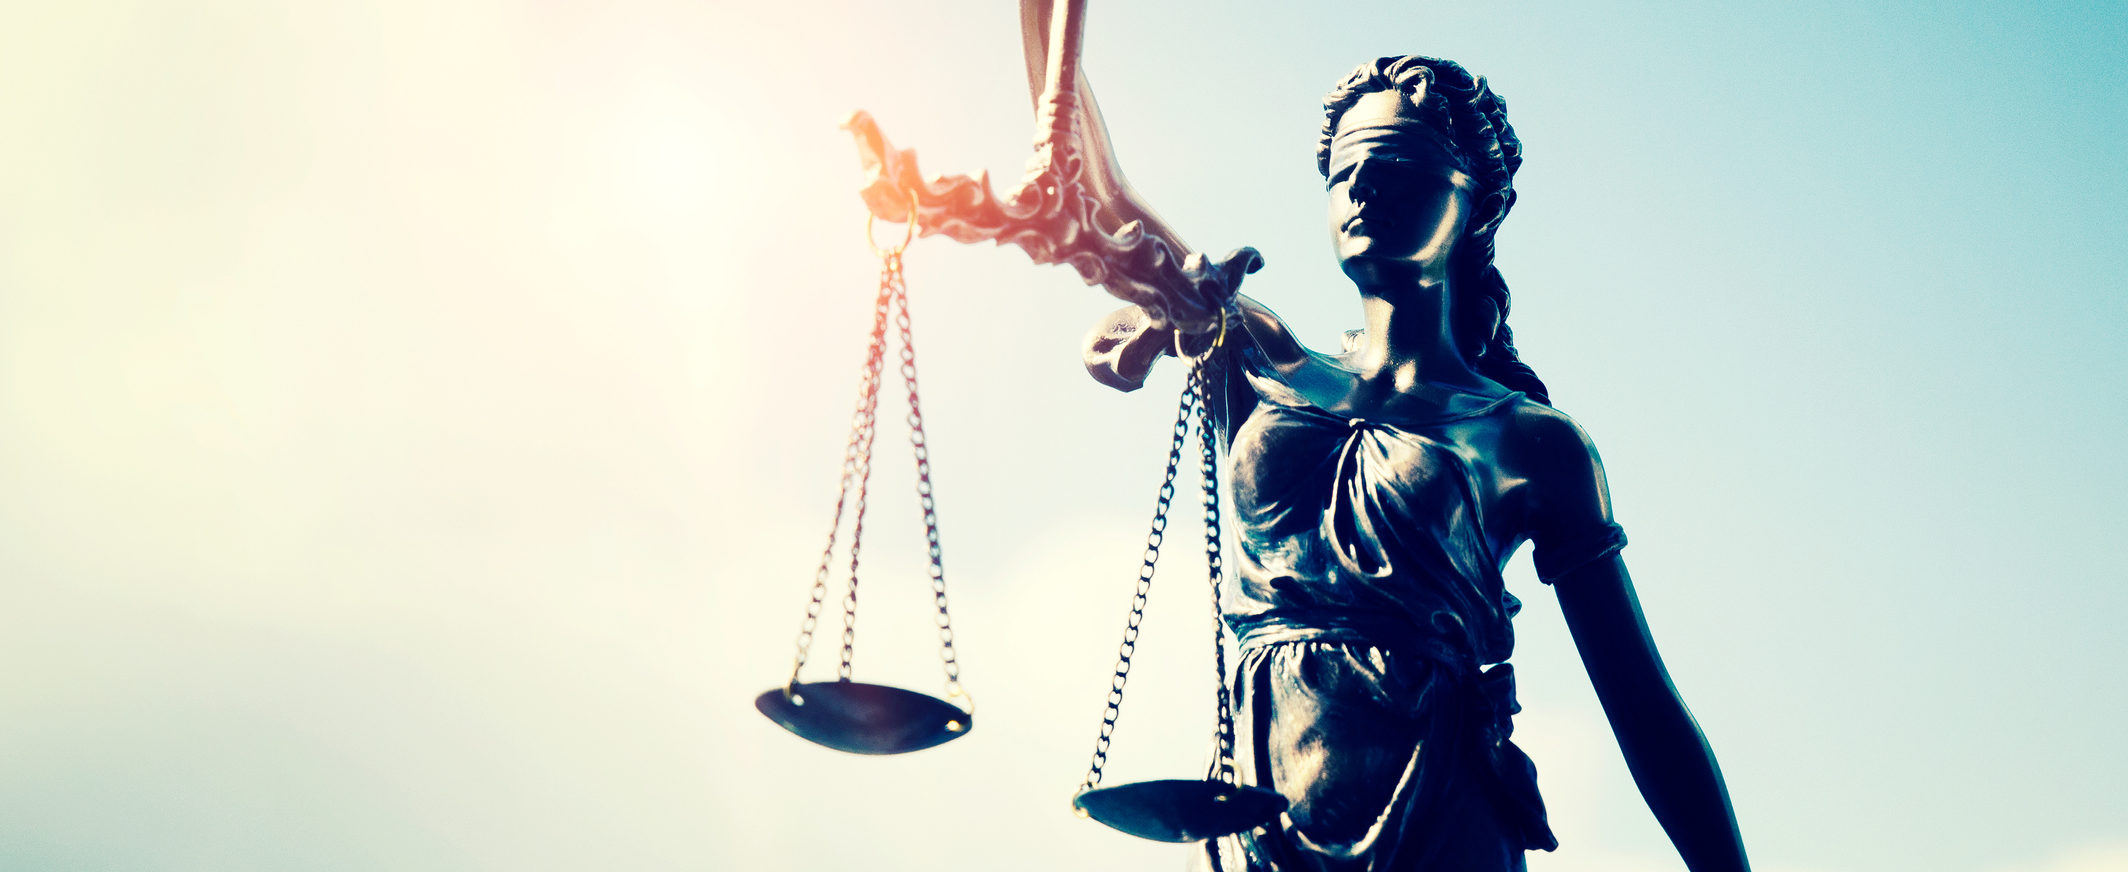 Lady justice, themis, statue of justice on sky background. law attorney court lawyer judge courtroom legal lady concept